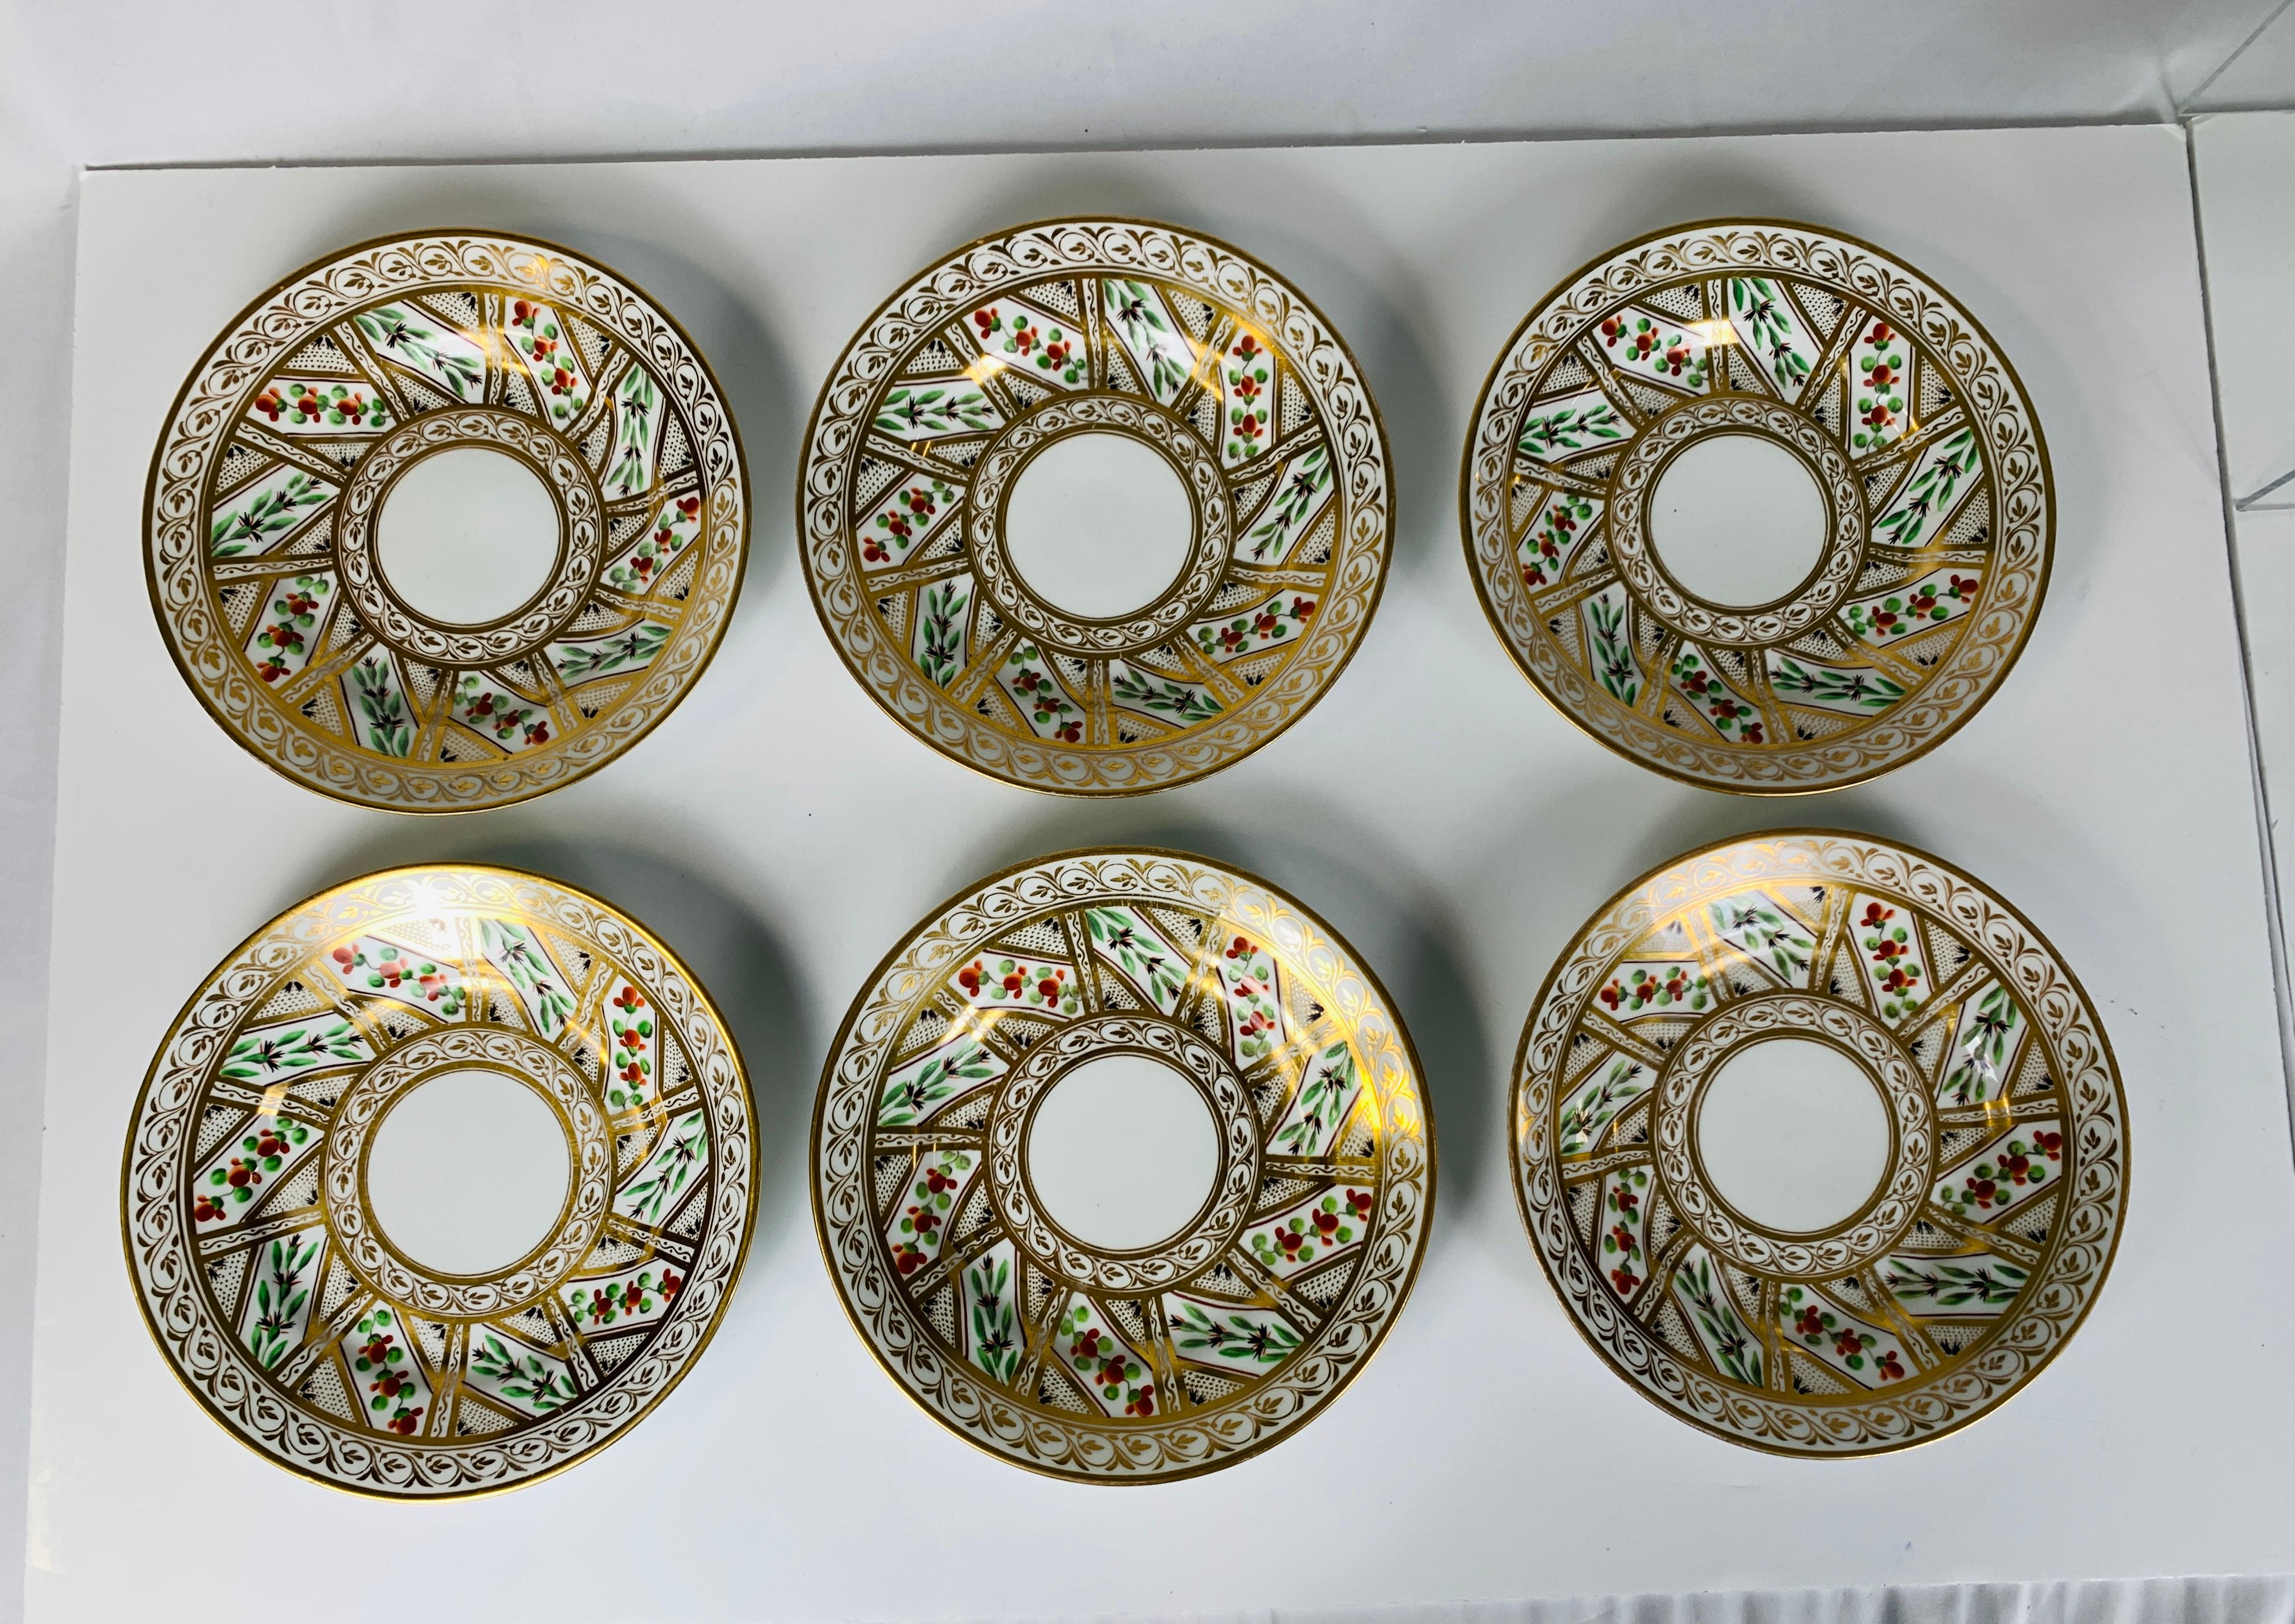 Regency Set of Six Antique English Porcelain Dishes Hand Painted by Derby, circa 1810